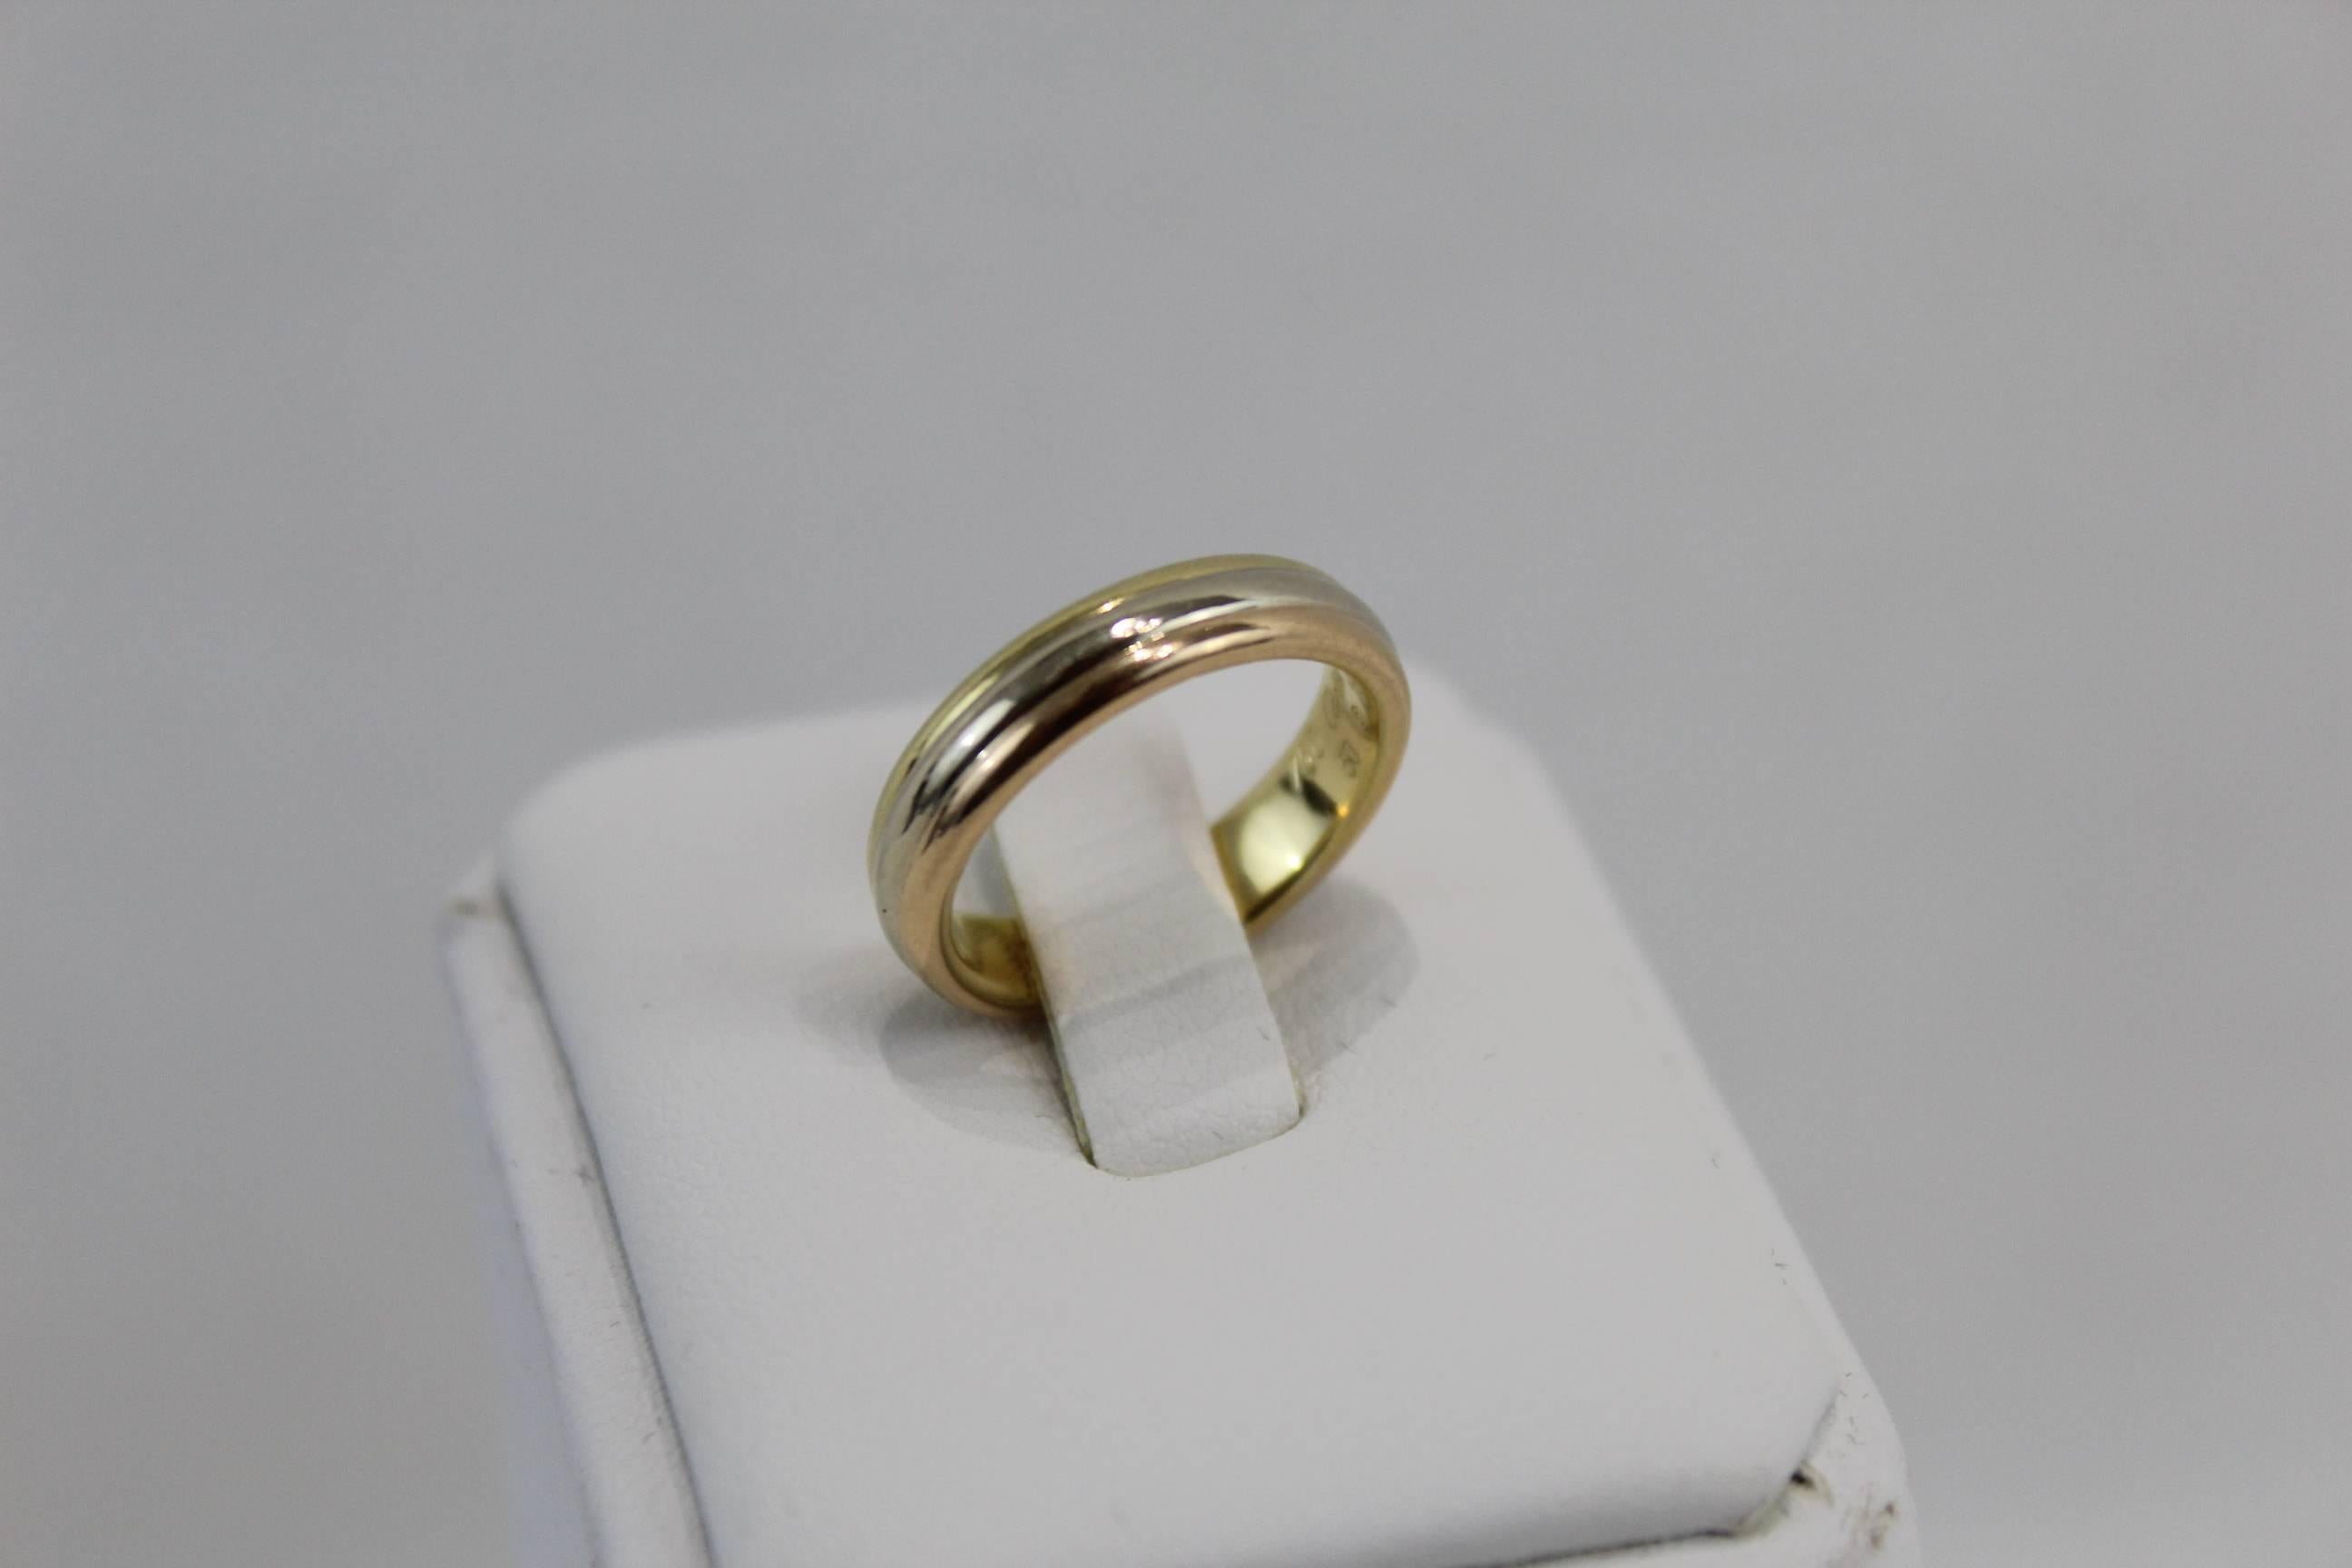 Nice Cartier Trinity Alliance, whith 2 different types of gold (yellow, pink and white)

European size 50.

Good condition but some signs of wear.

Ring from 1998

Serial number and signature in the inner part